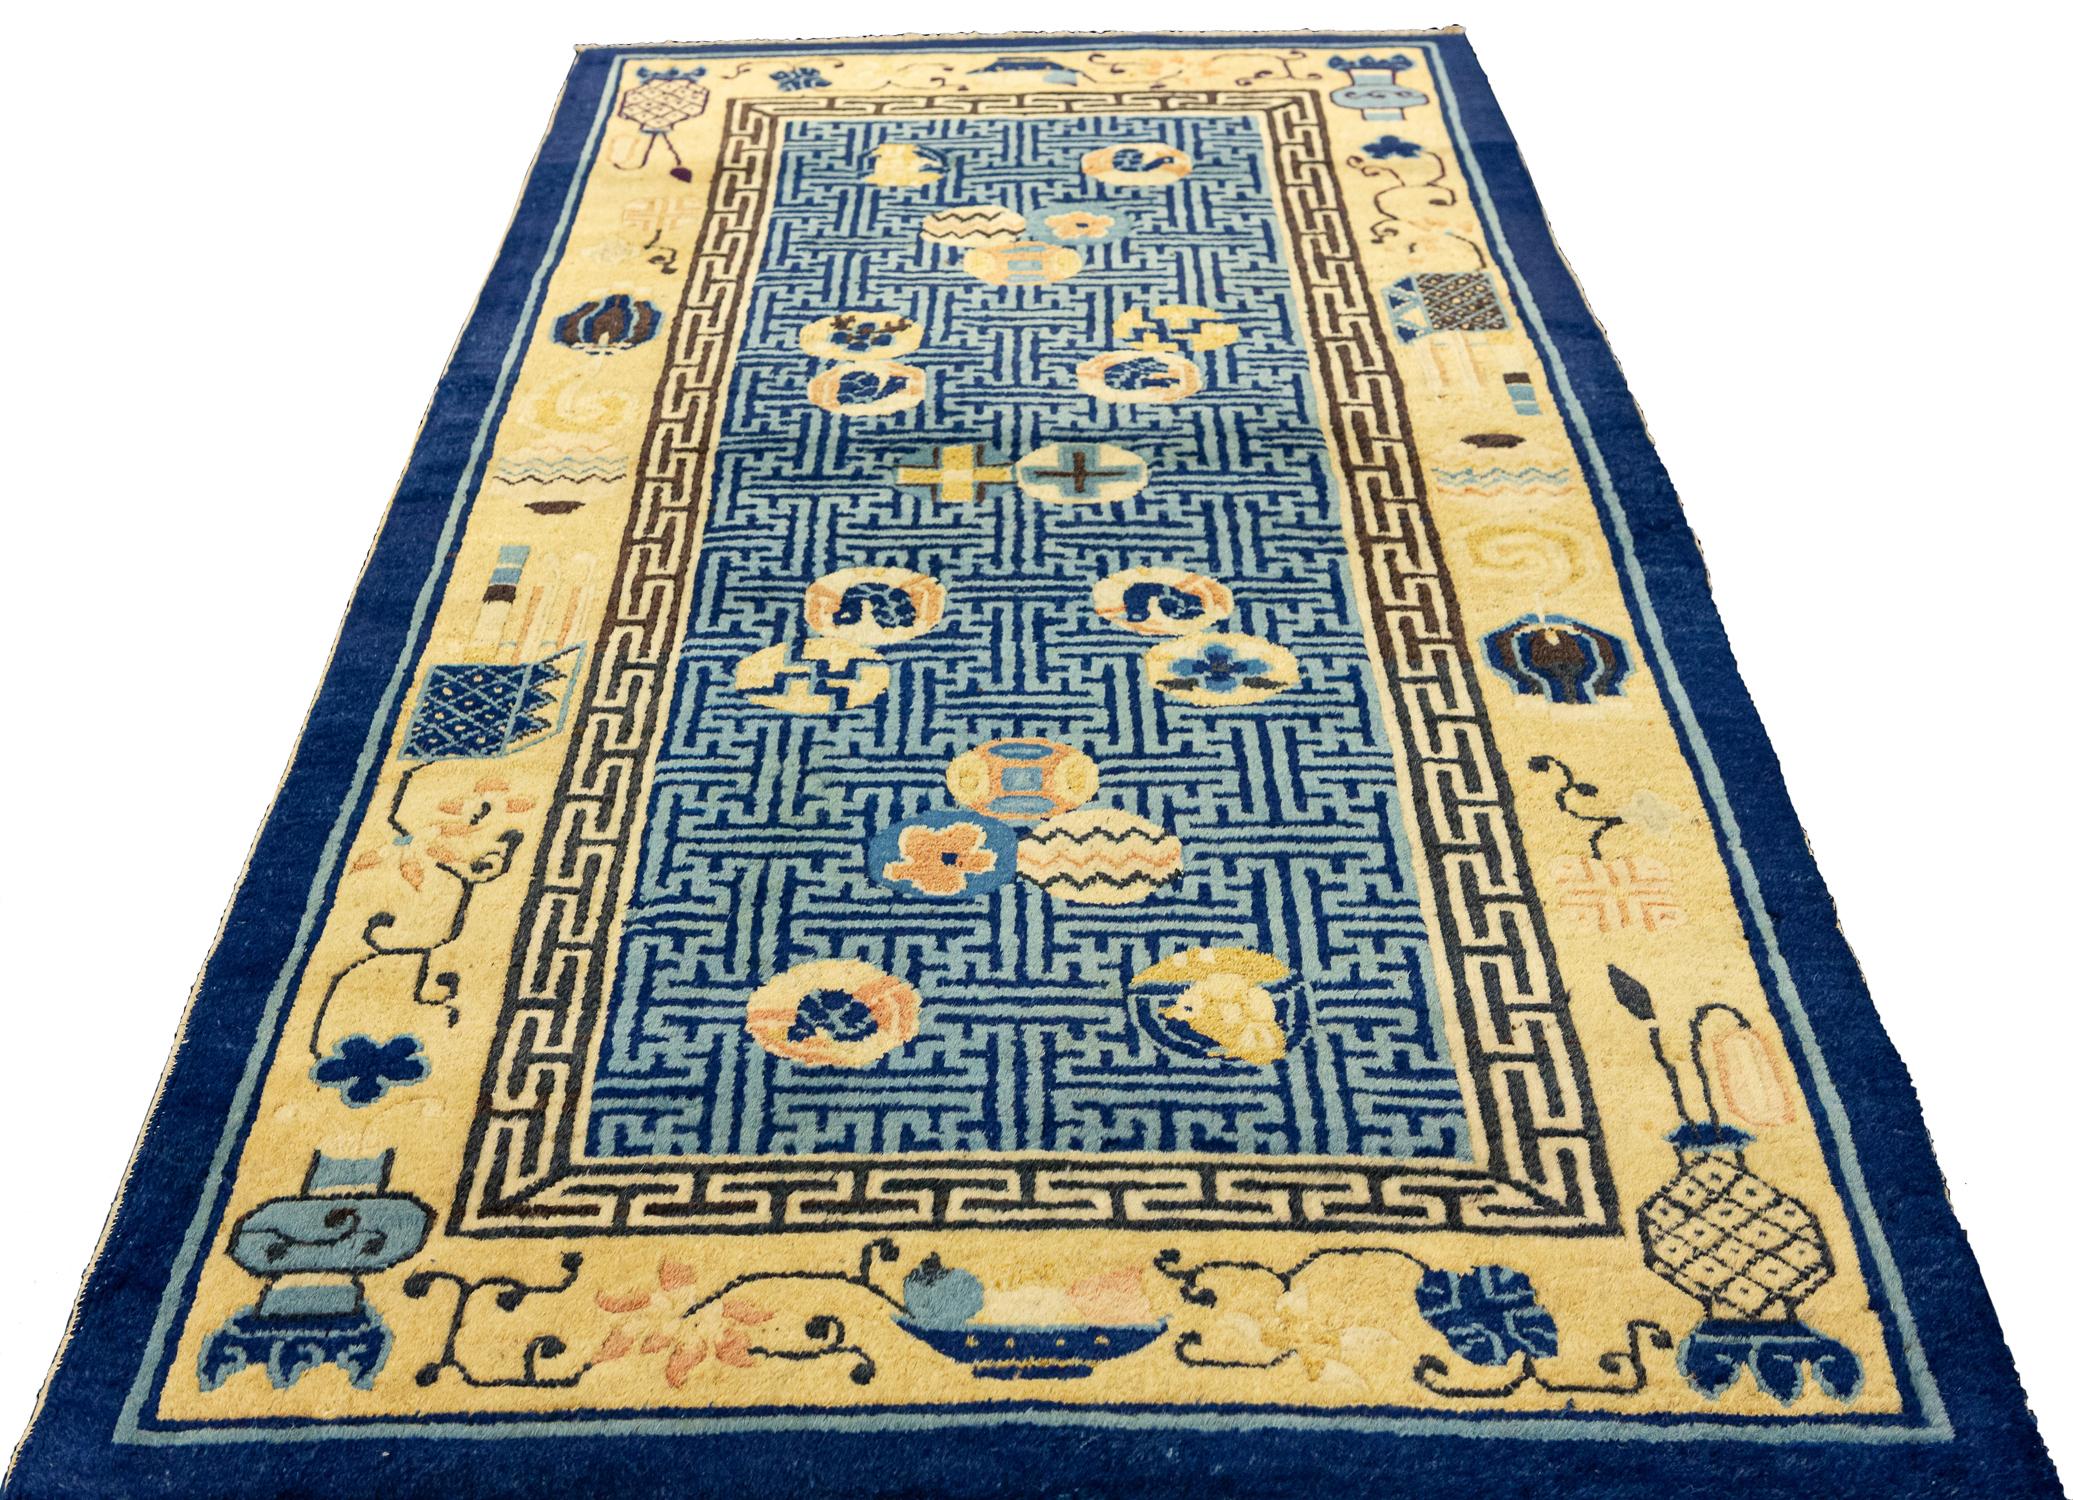 Antique Traditional Chinese Motifs Small Peking Rug, 19th Century For Sale 3